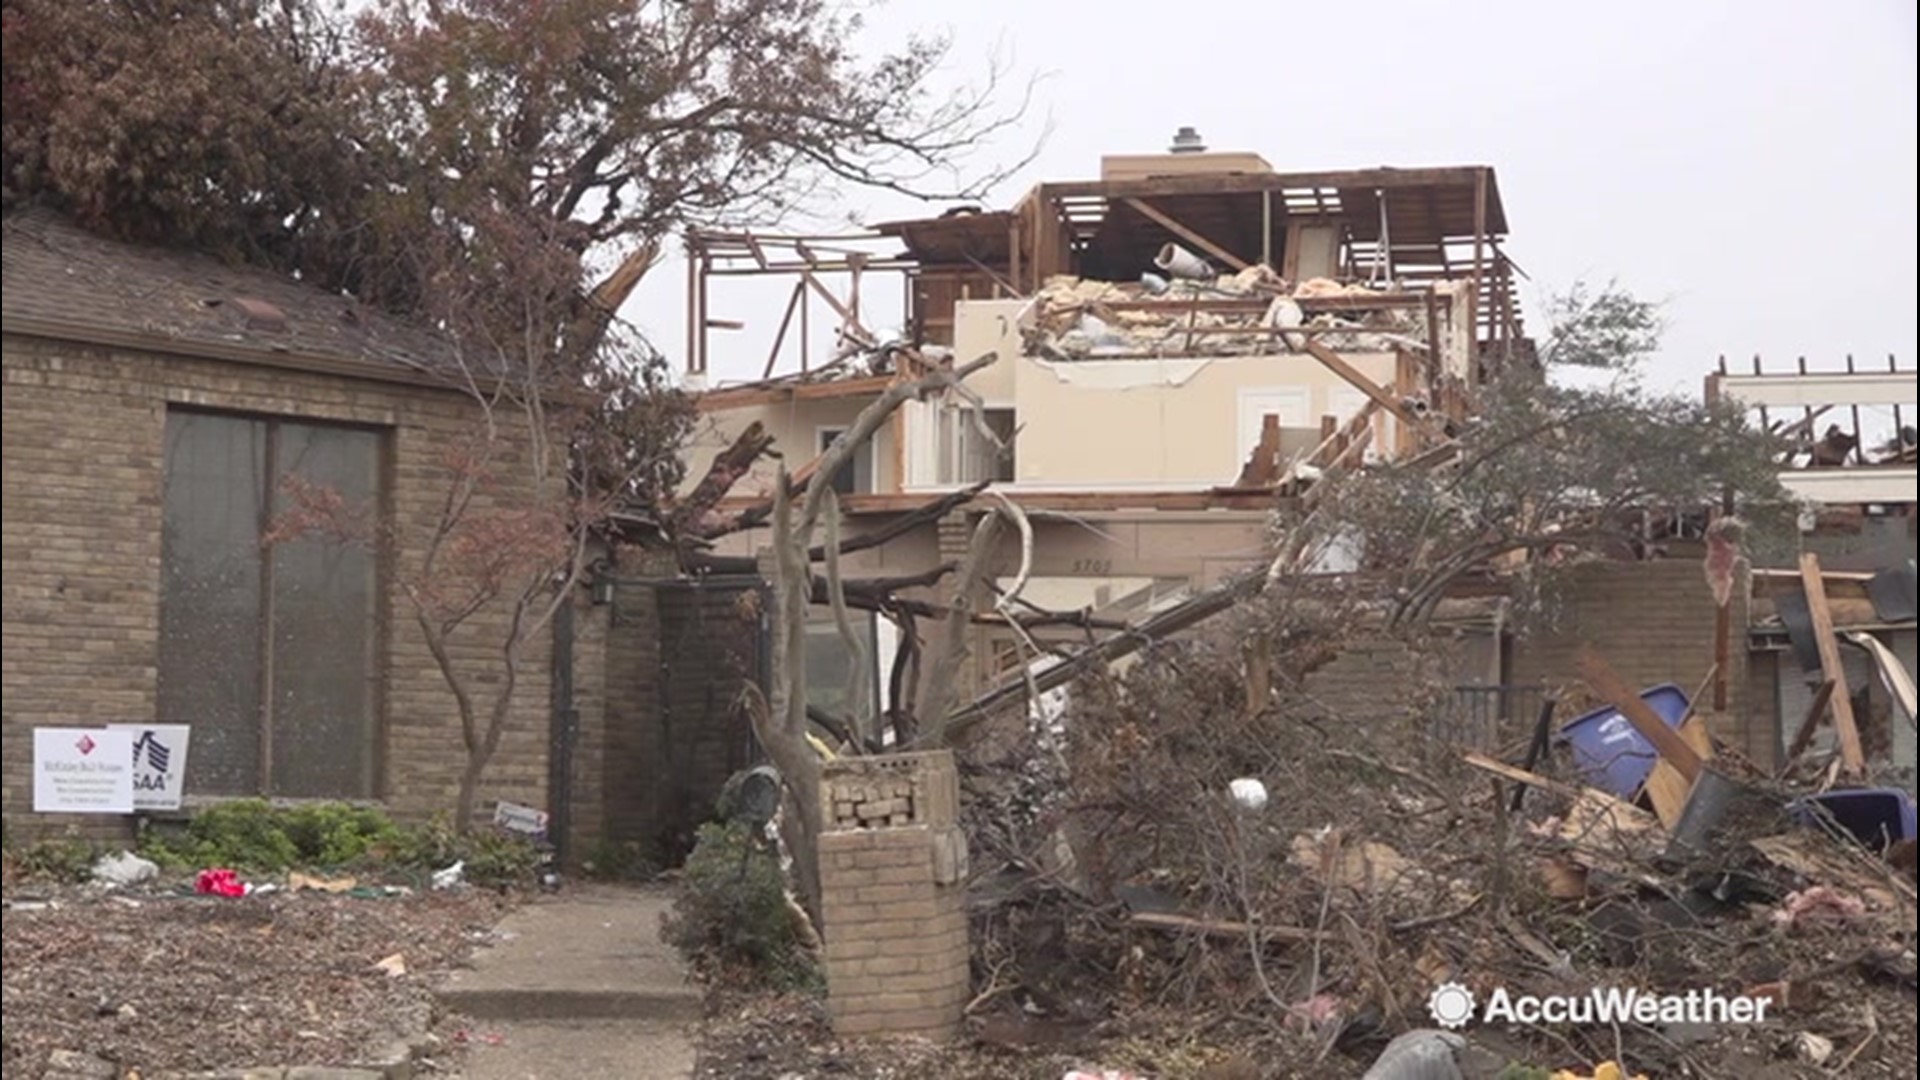 Bill Wadell visited Dallas, Texas, on Nov. 20, one month after a series of tornadoes struck the city. Bill has the details on how the community has been recovering.